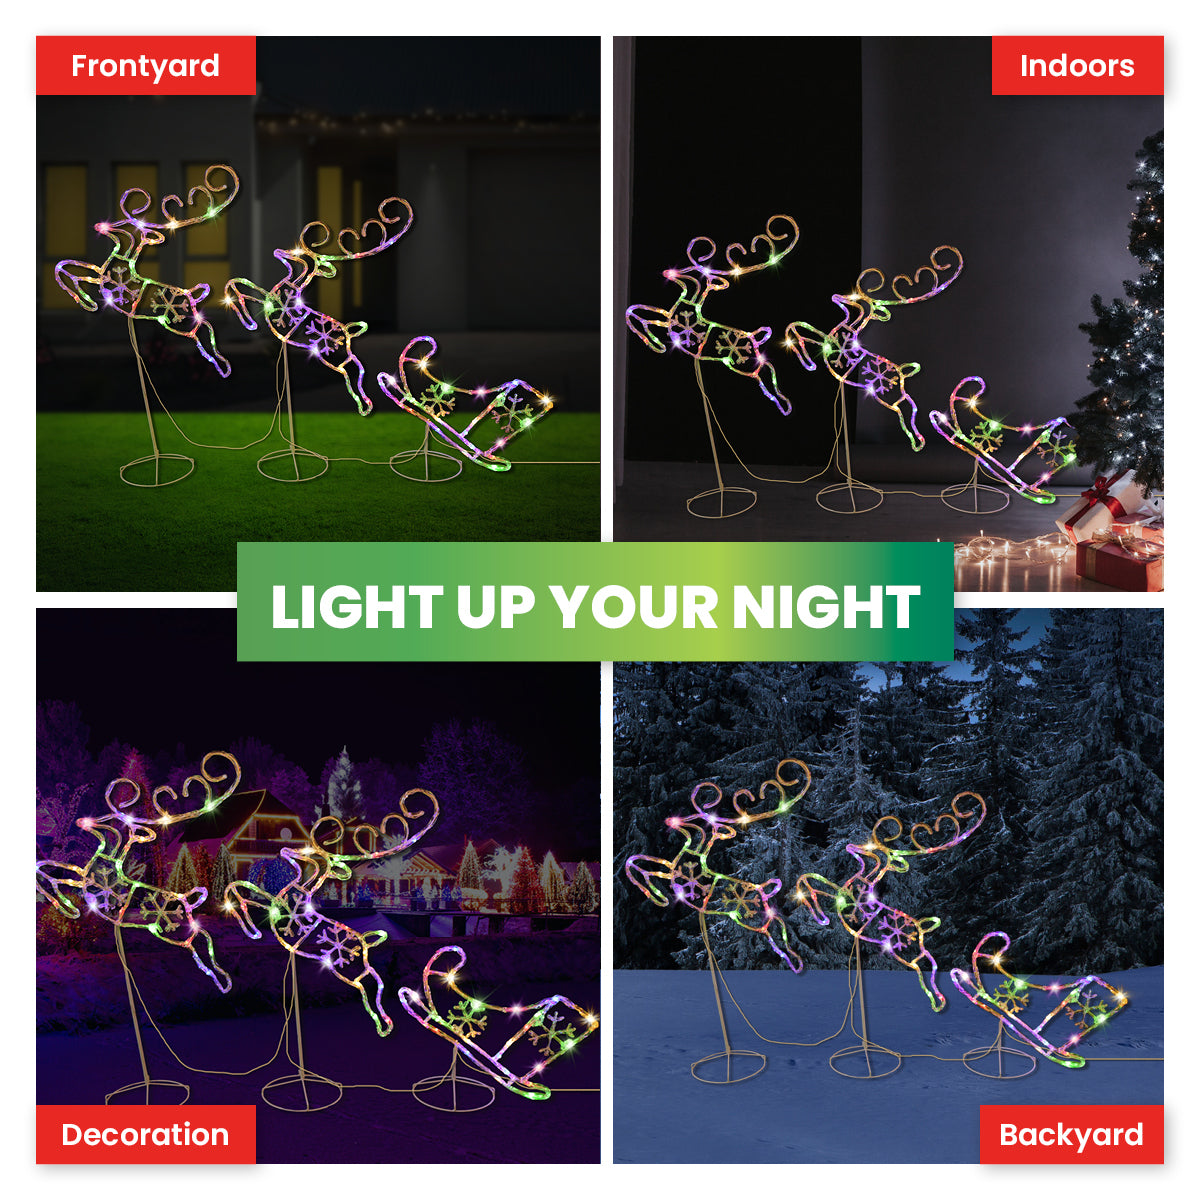 SAS Electrical 3m Reindeer & Sleigh Set Rope Light With Stands Multi-Colour Deals499